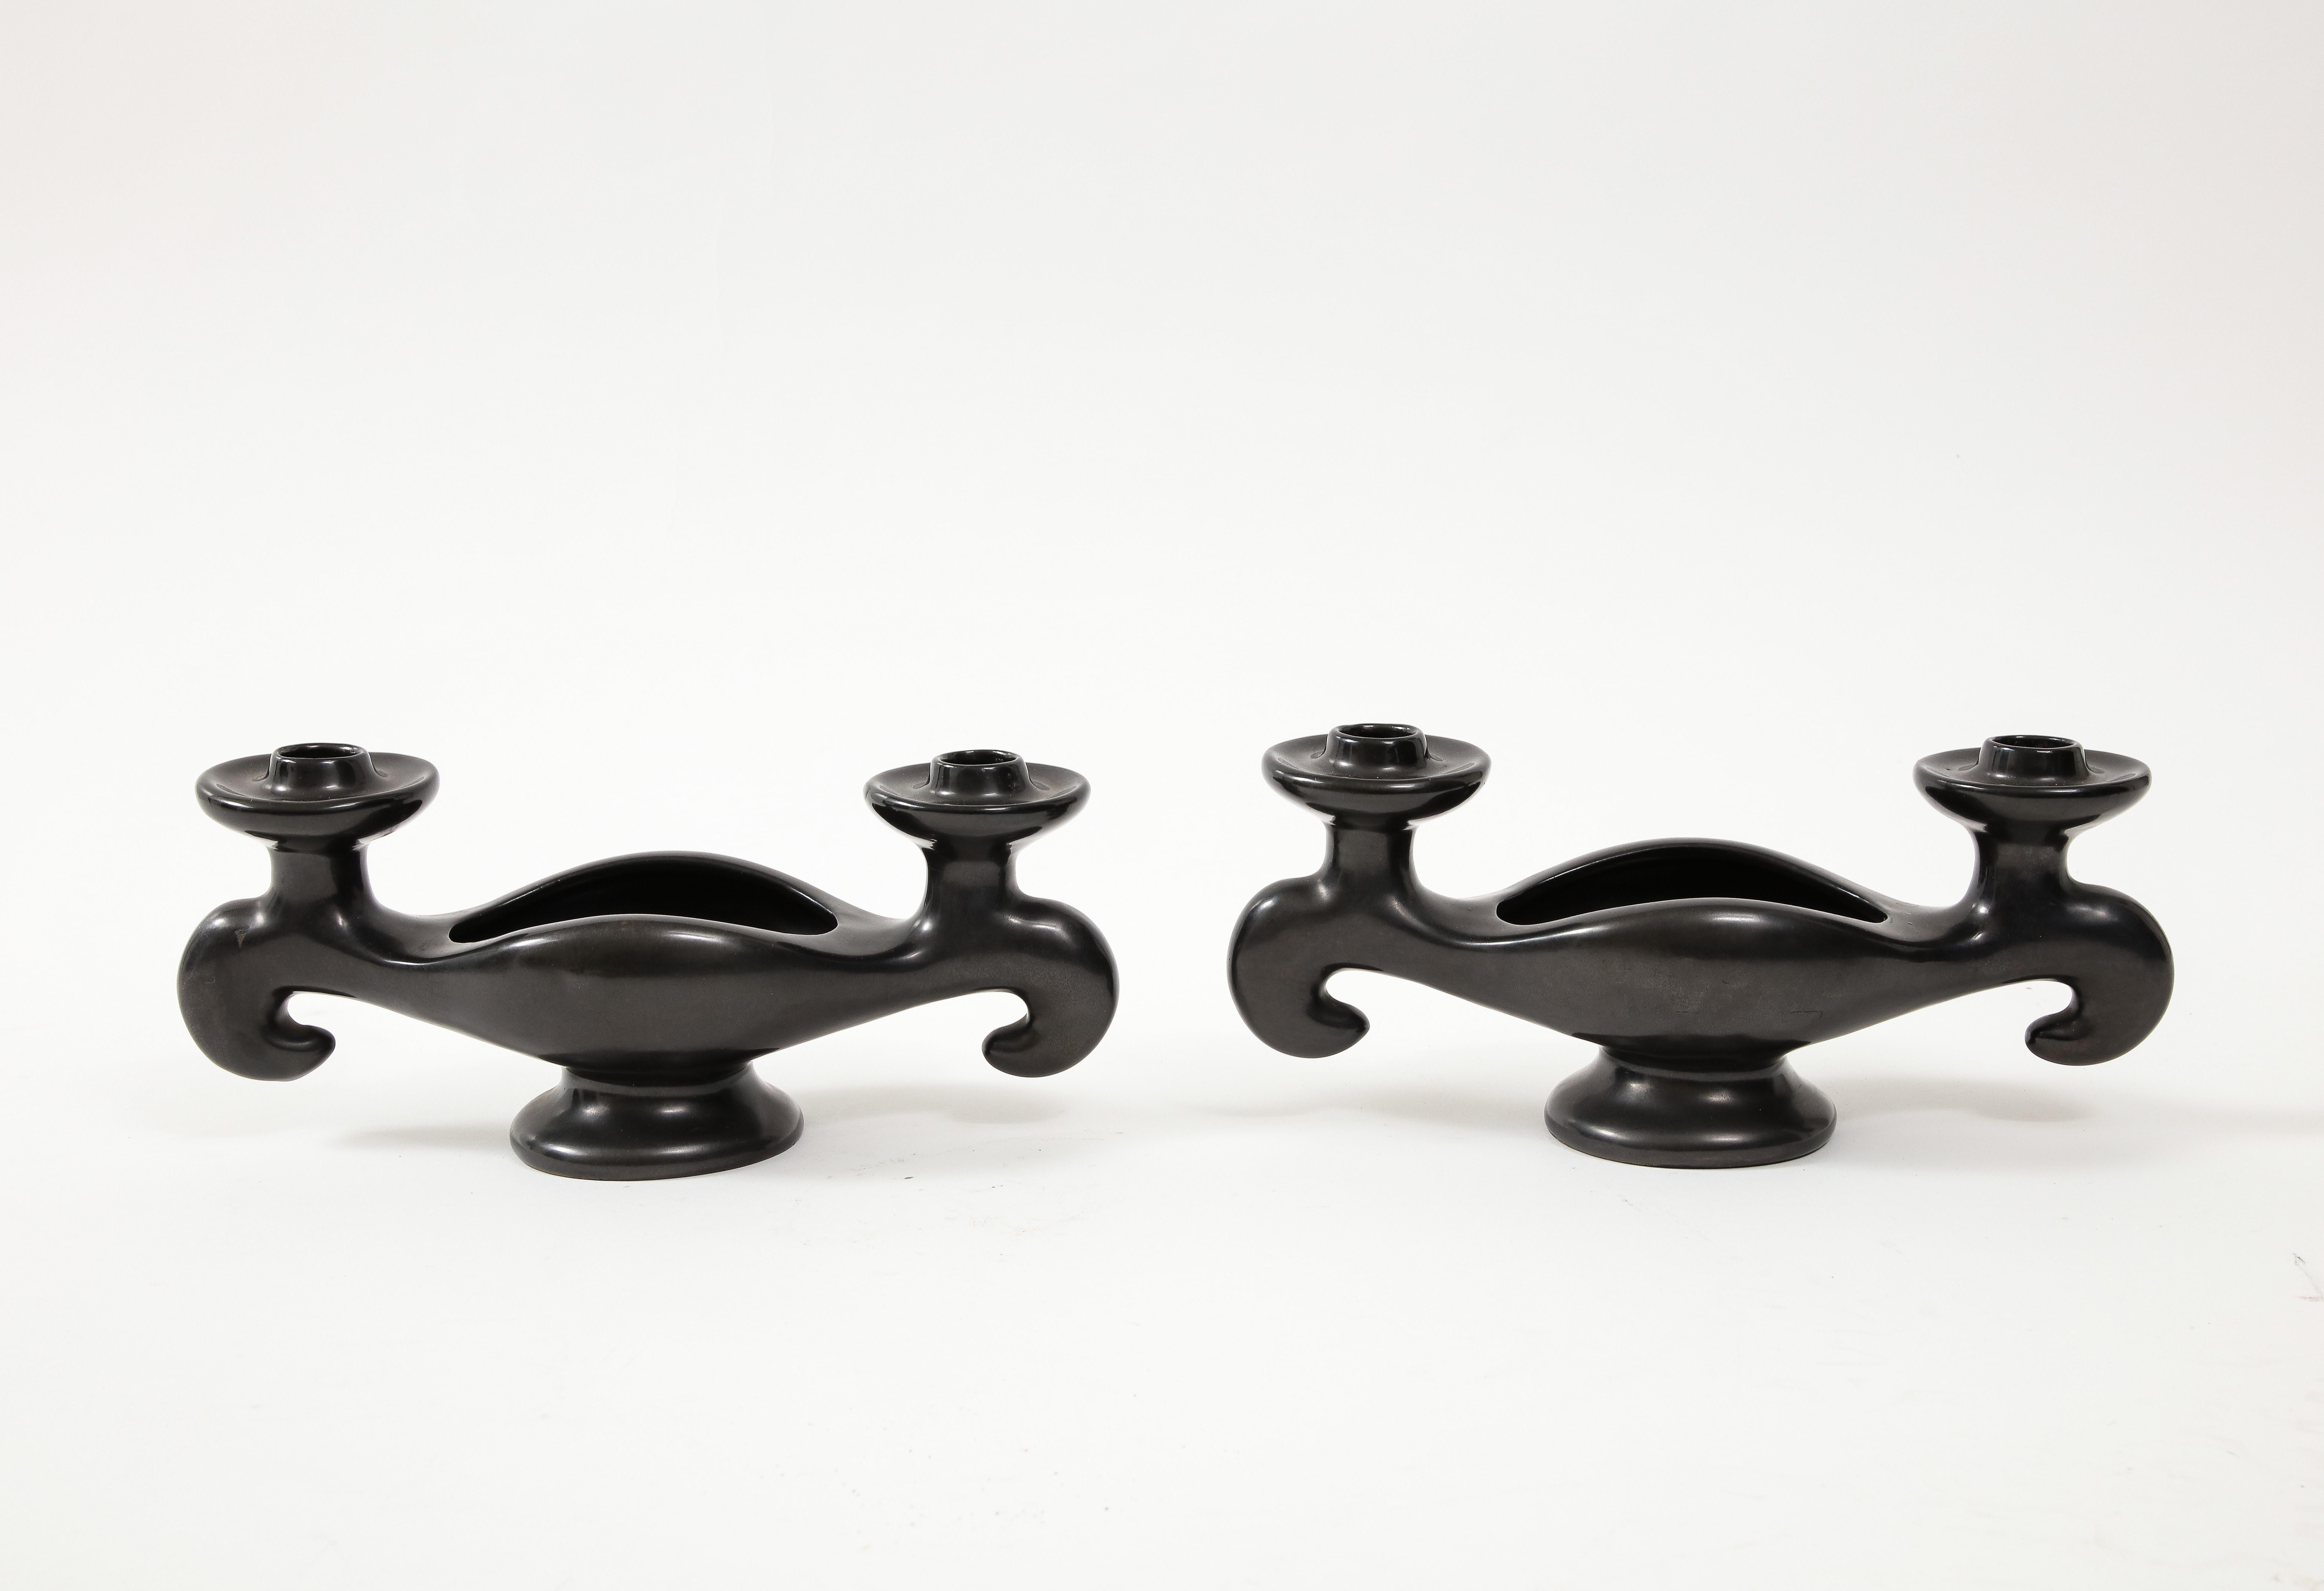 Pair of Georges Jouve Style Period candlesticks, France, c . 1950’s
Ceramic

Measures: H: 4.5 W: 11 D: 3.75 in.